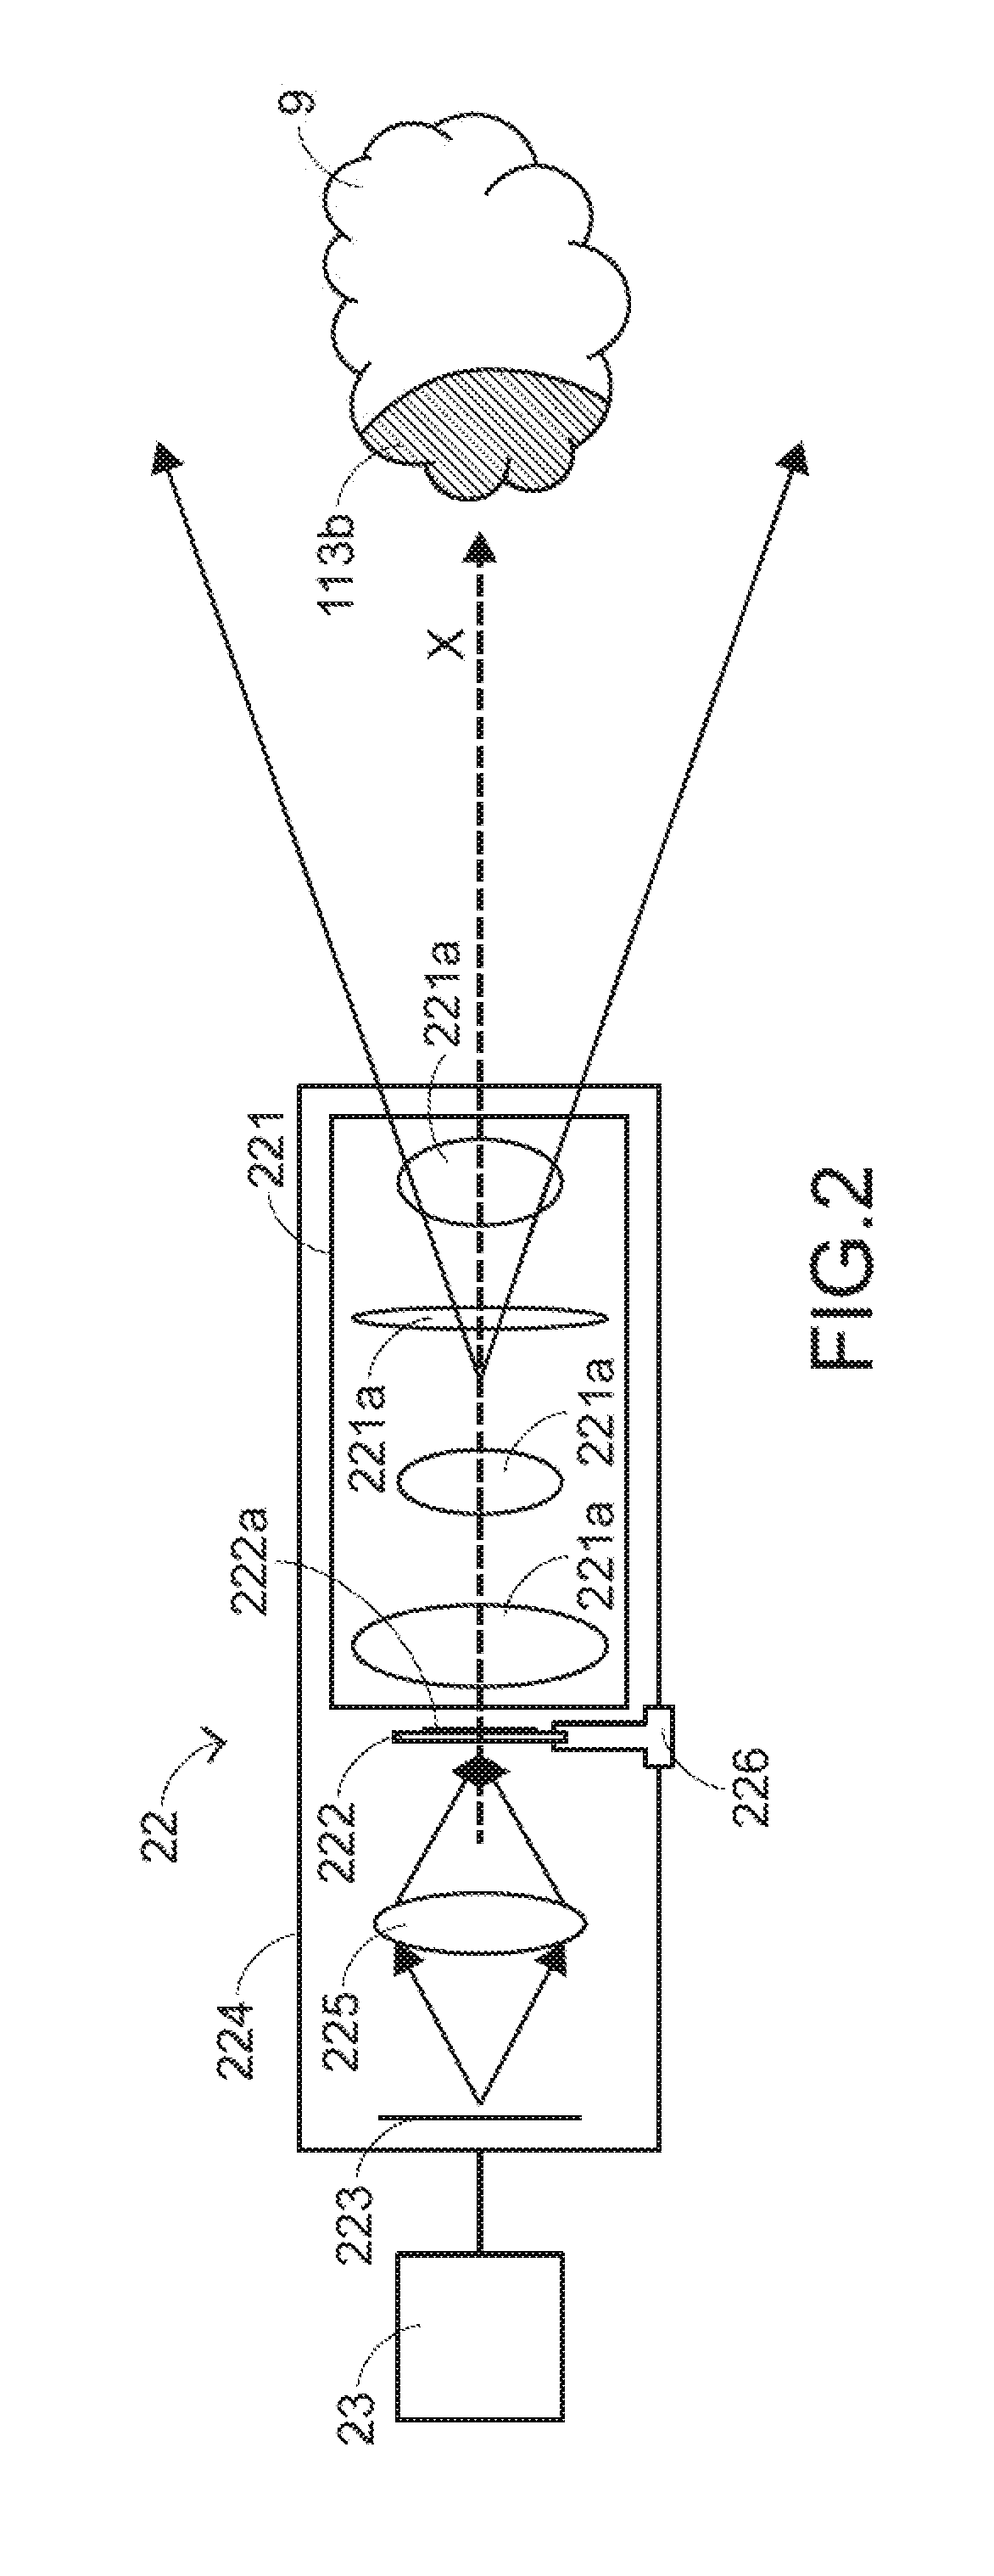 Spatial information capturing device